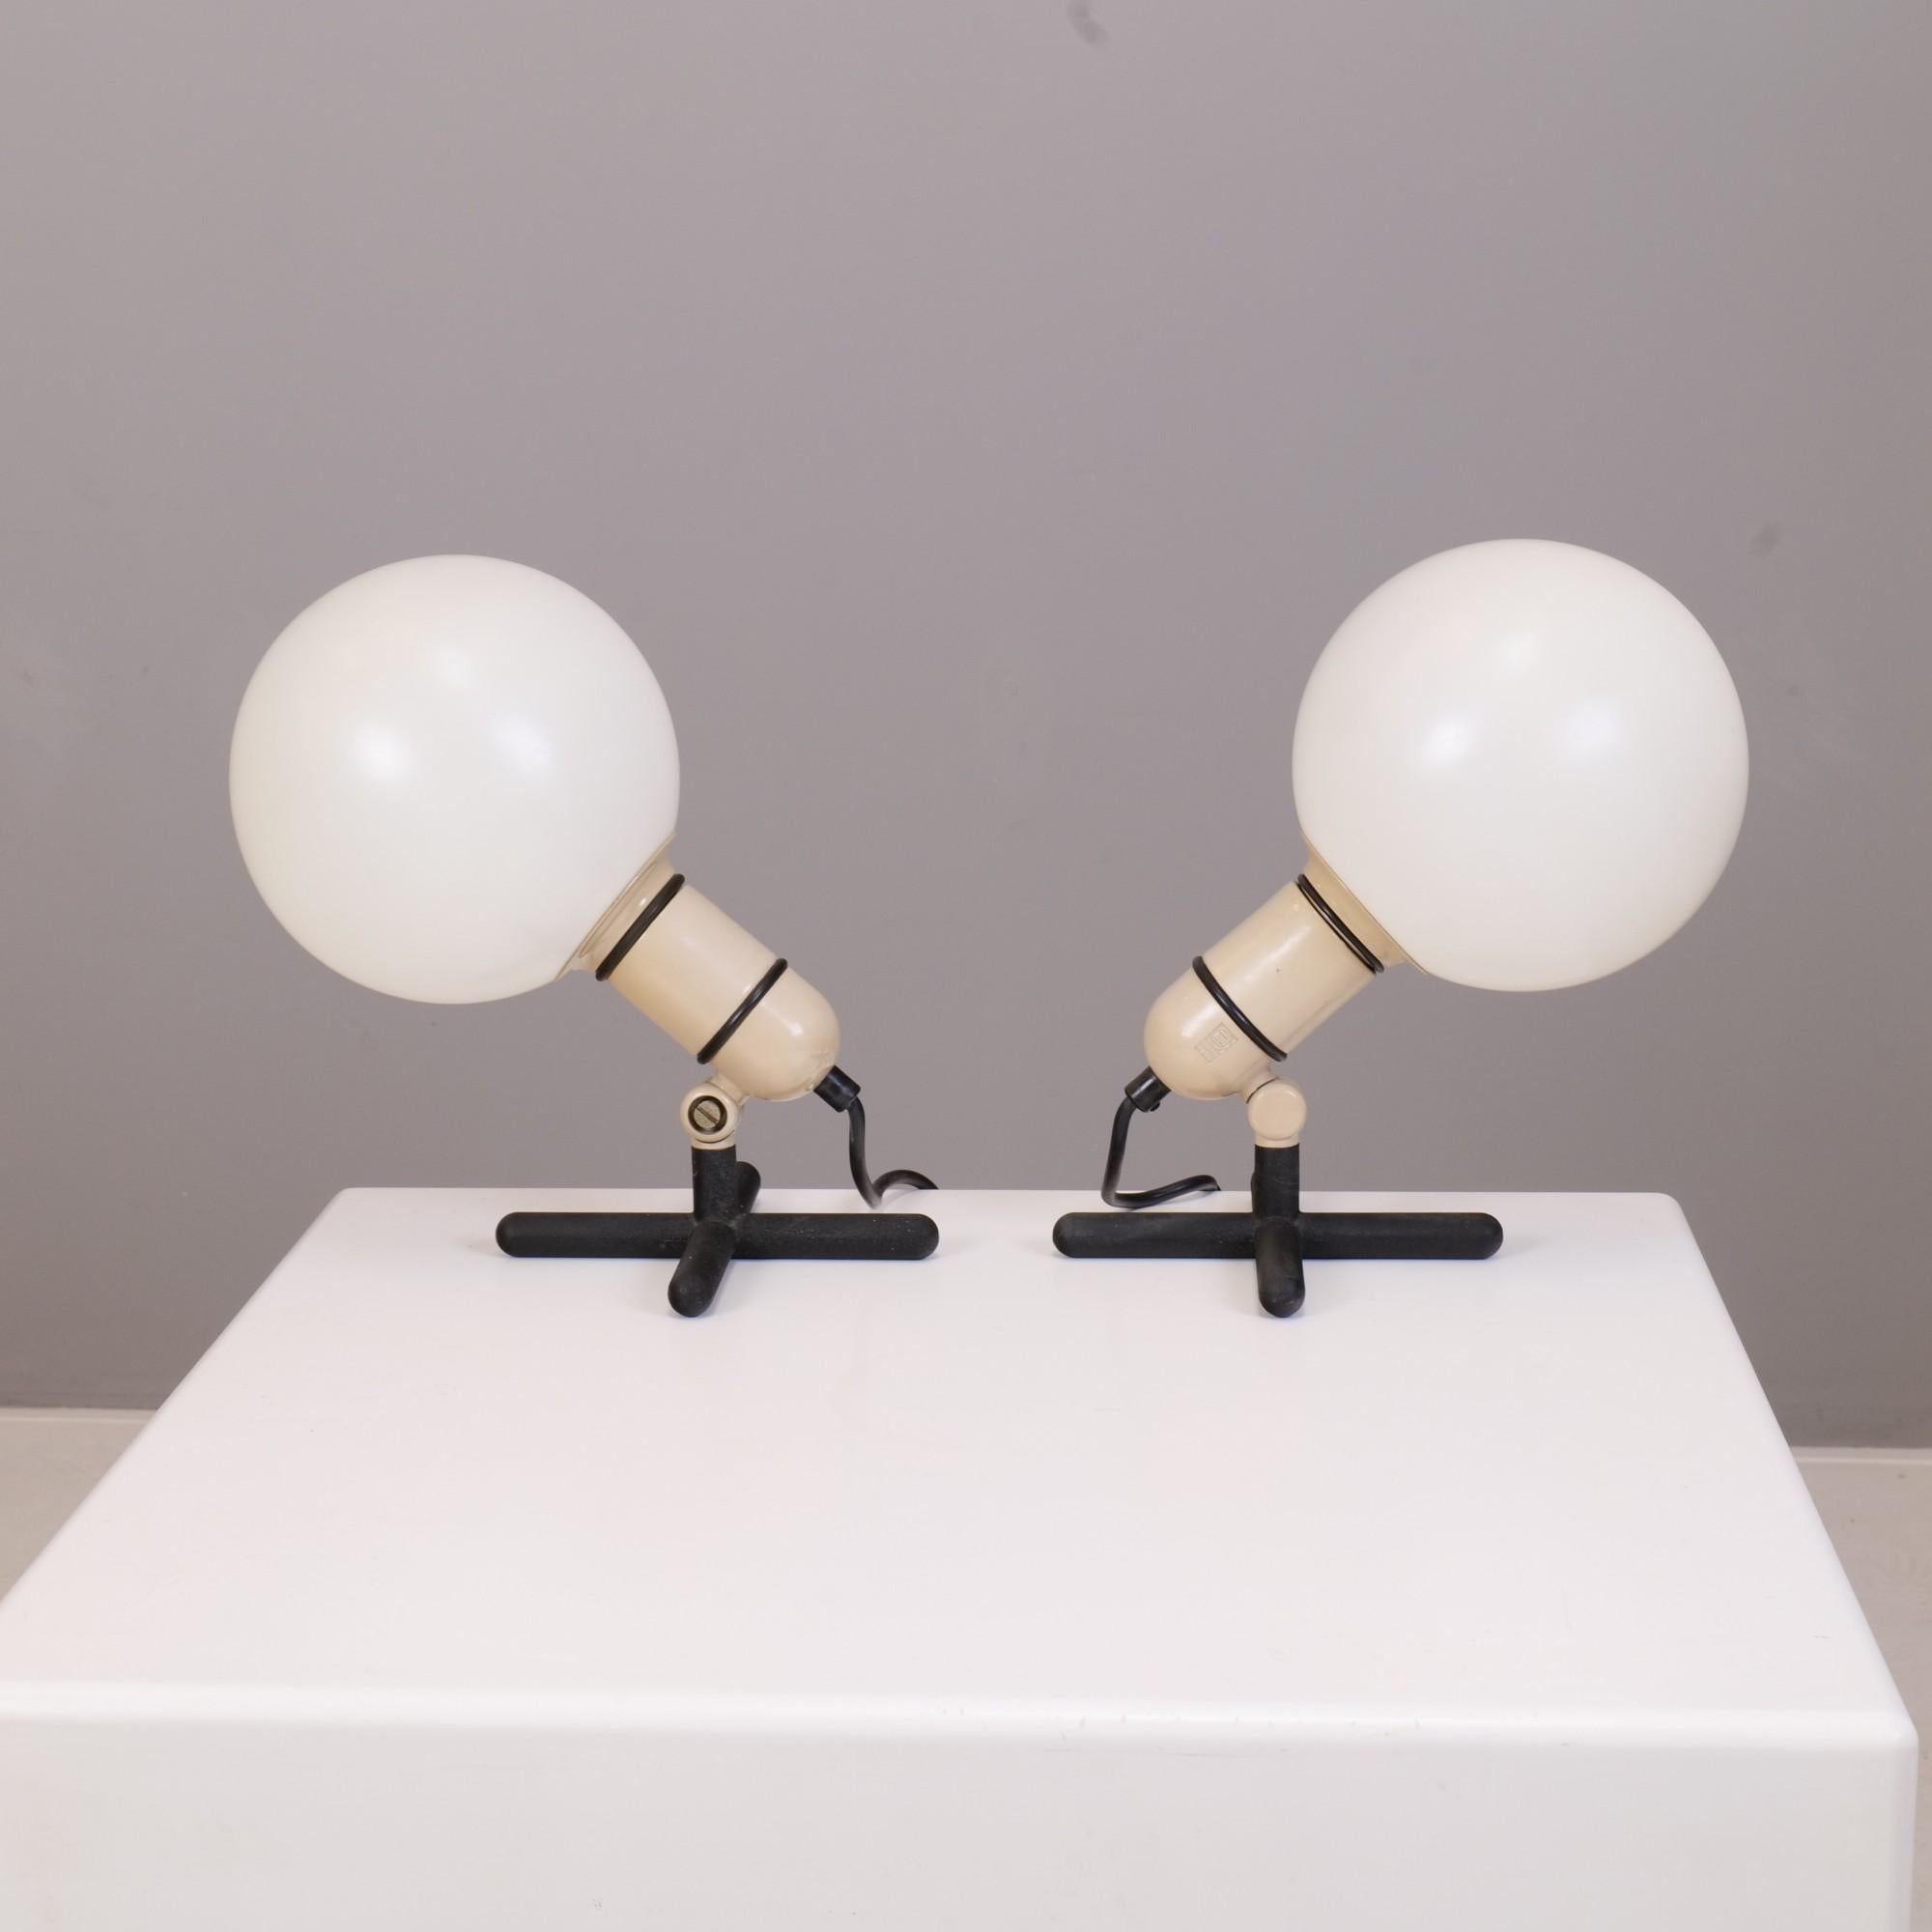 Mid-20th Century Set of 2 Bubble Lamps by Jacques Biny for Lita, 1960's France